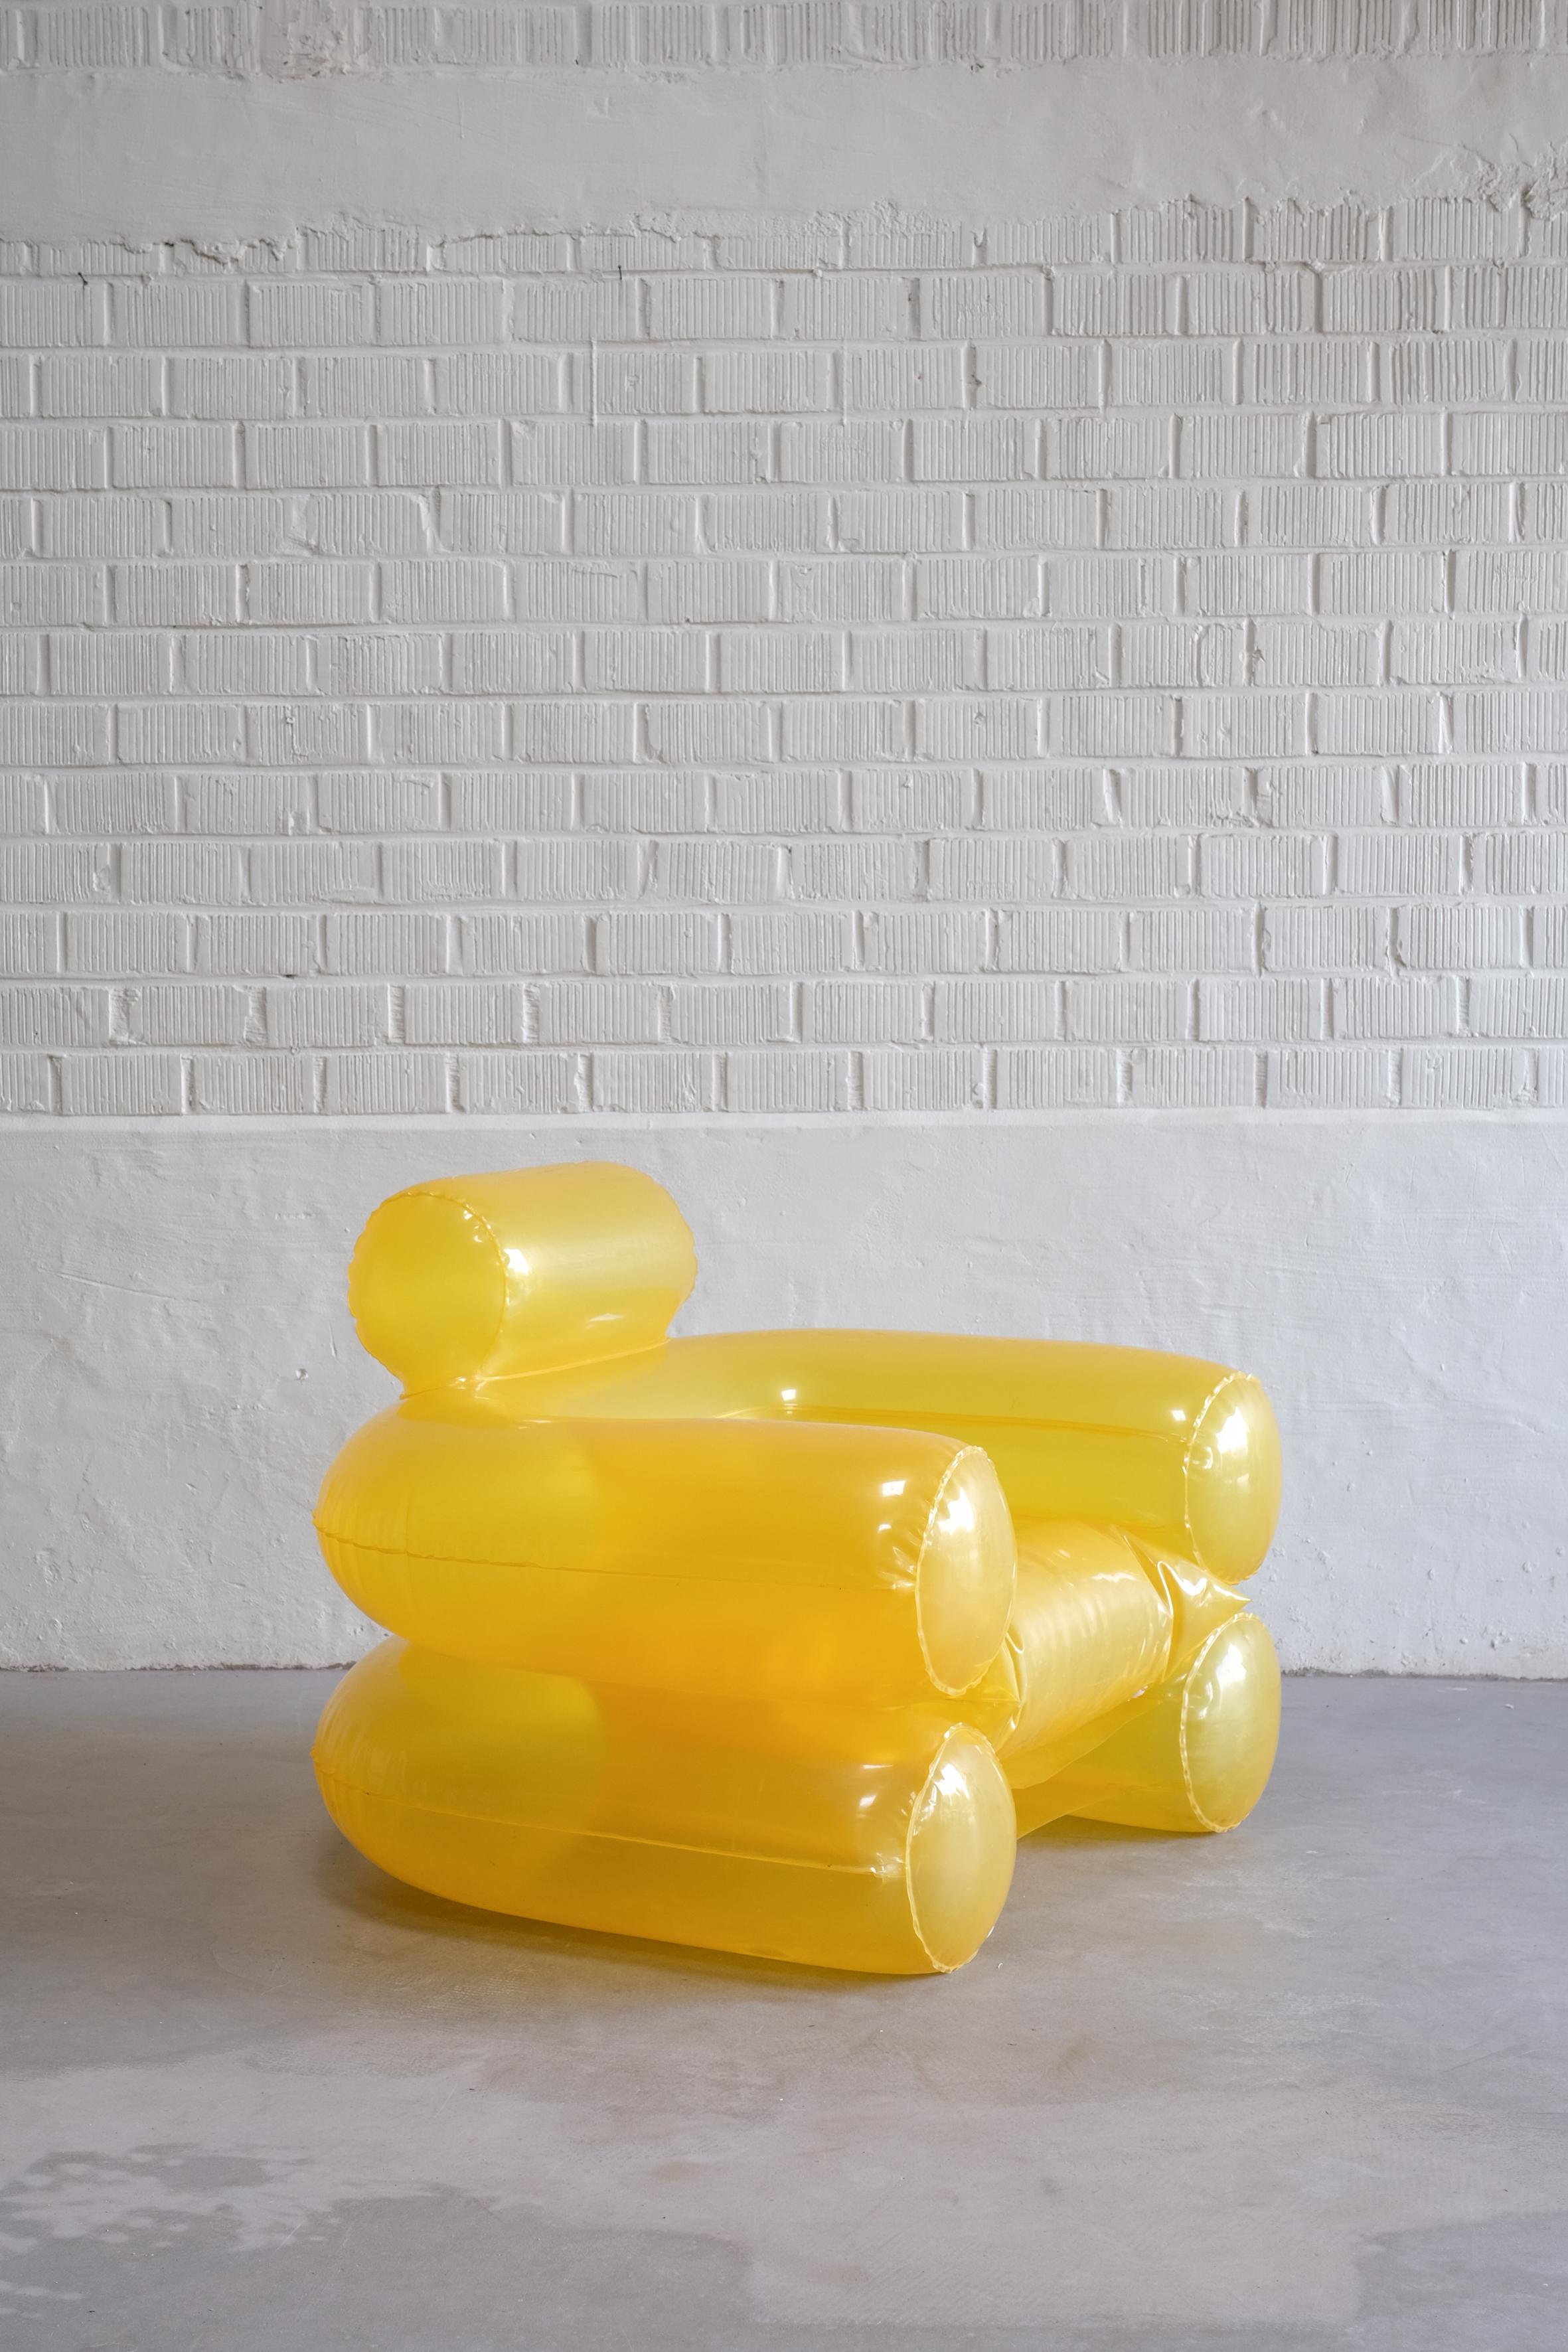 Vintage Blow inflatable lounge chair by Jonathan de Pas for Zanotta 1960s.